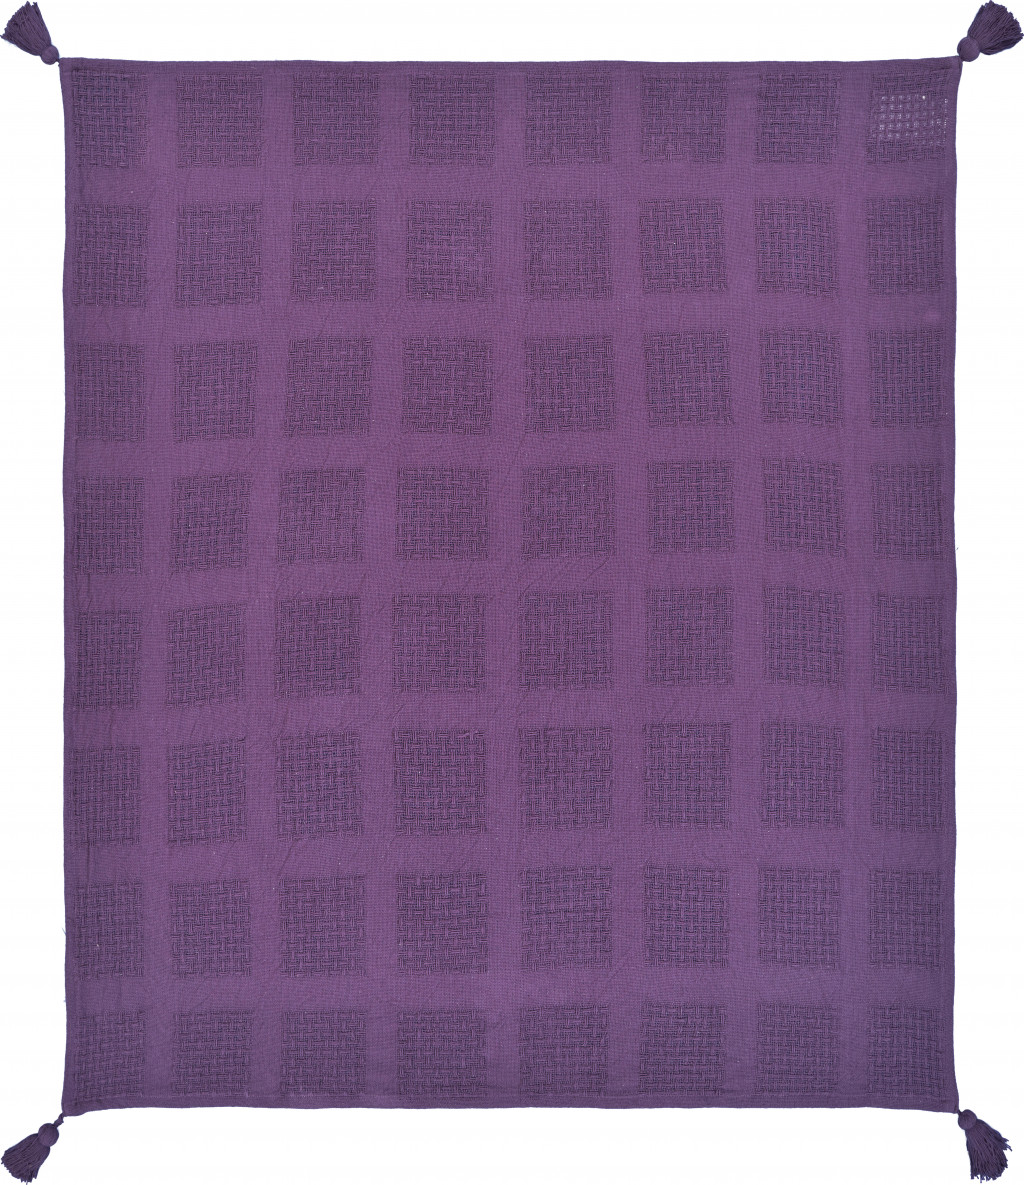 Purple Woven Cotton Solid Color Throw Blanket-516502-1